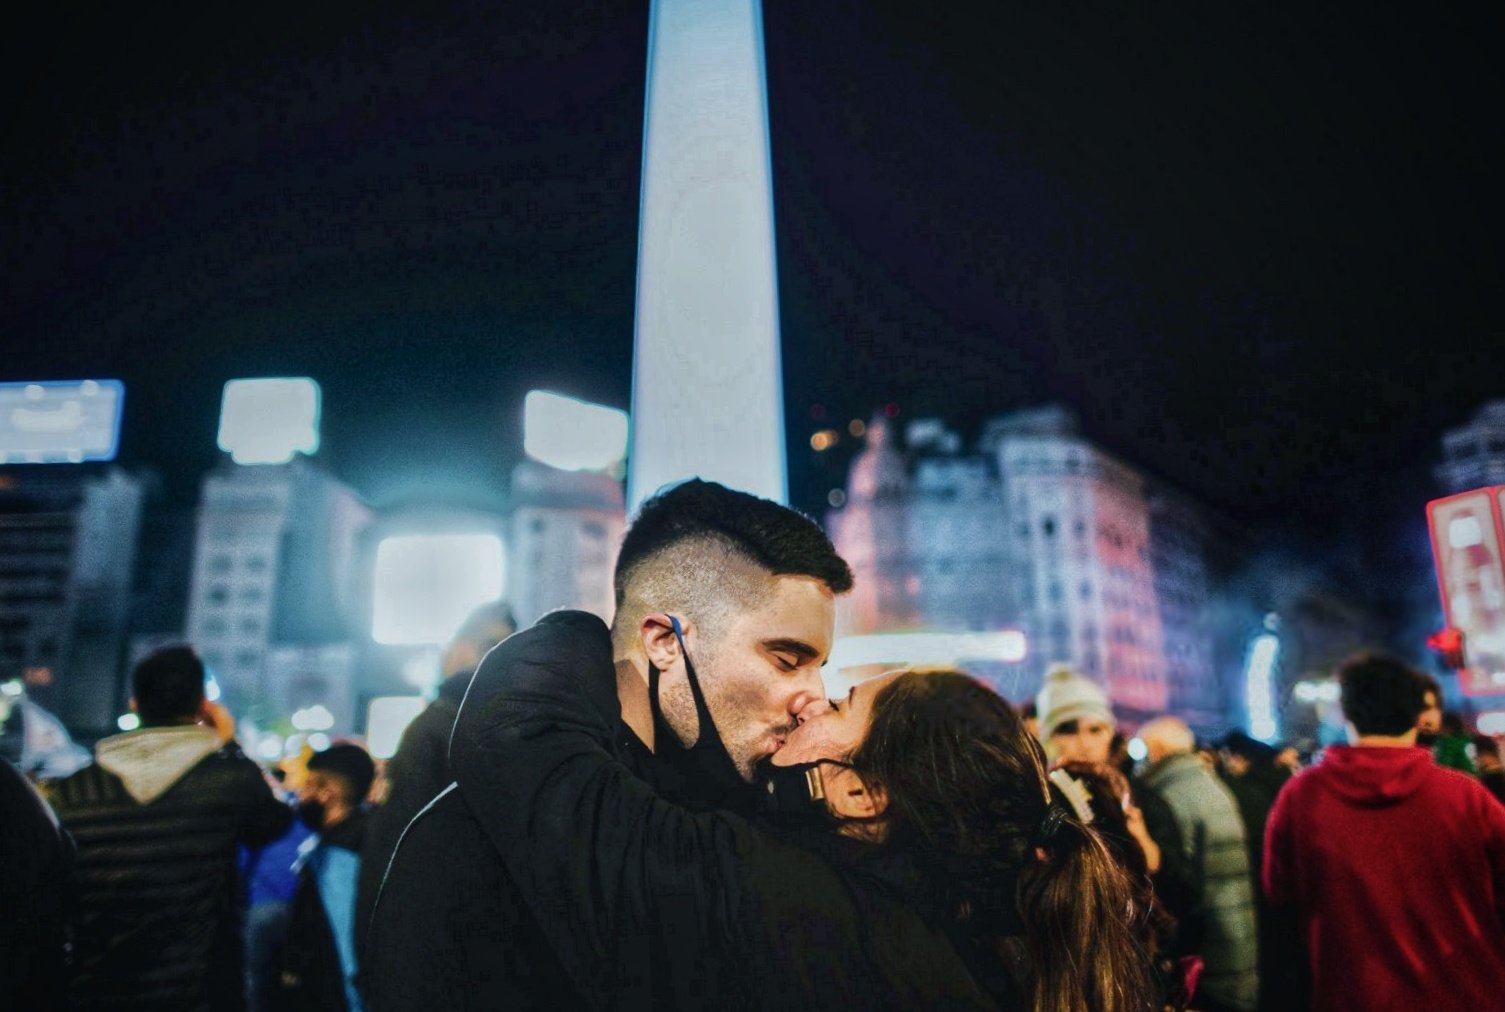 Couple celebrating Valentine's Day in Buenos Aires, Argentina.